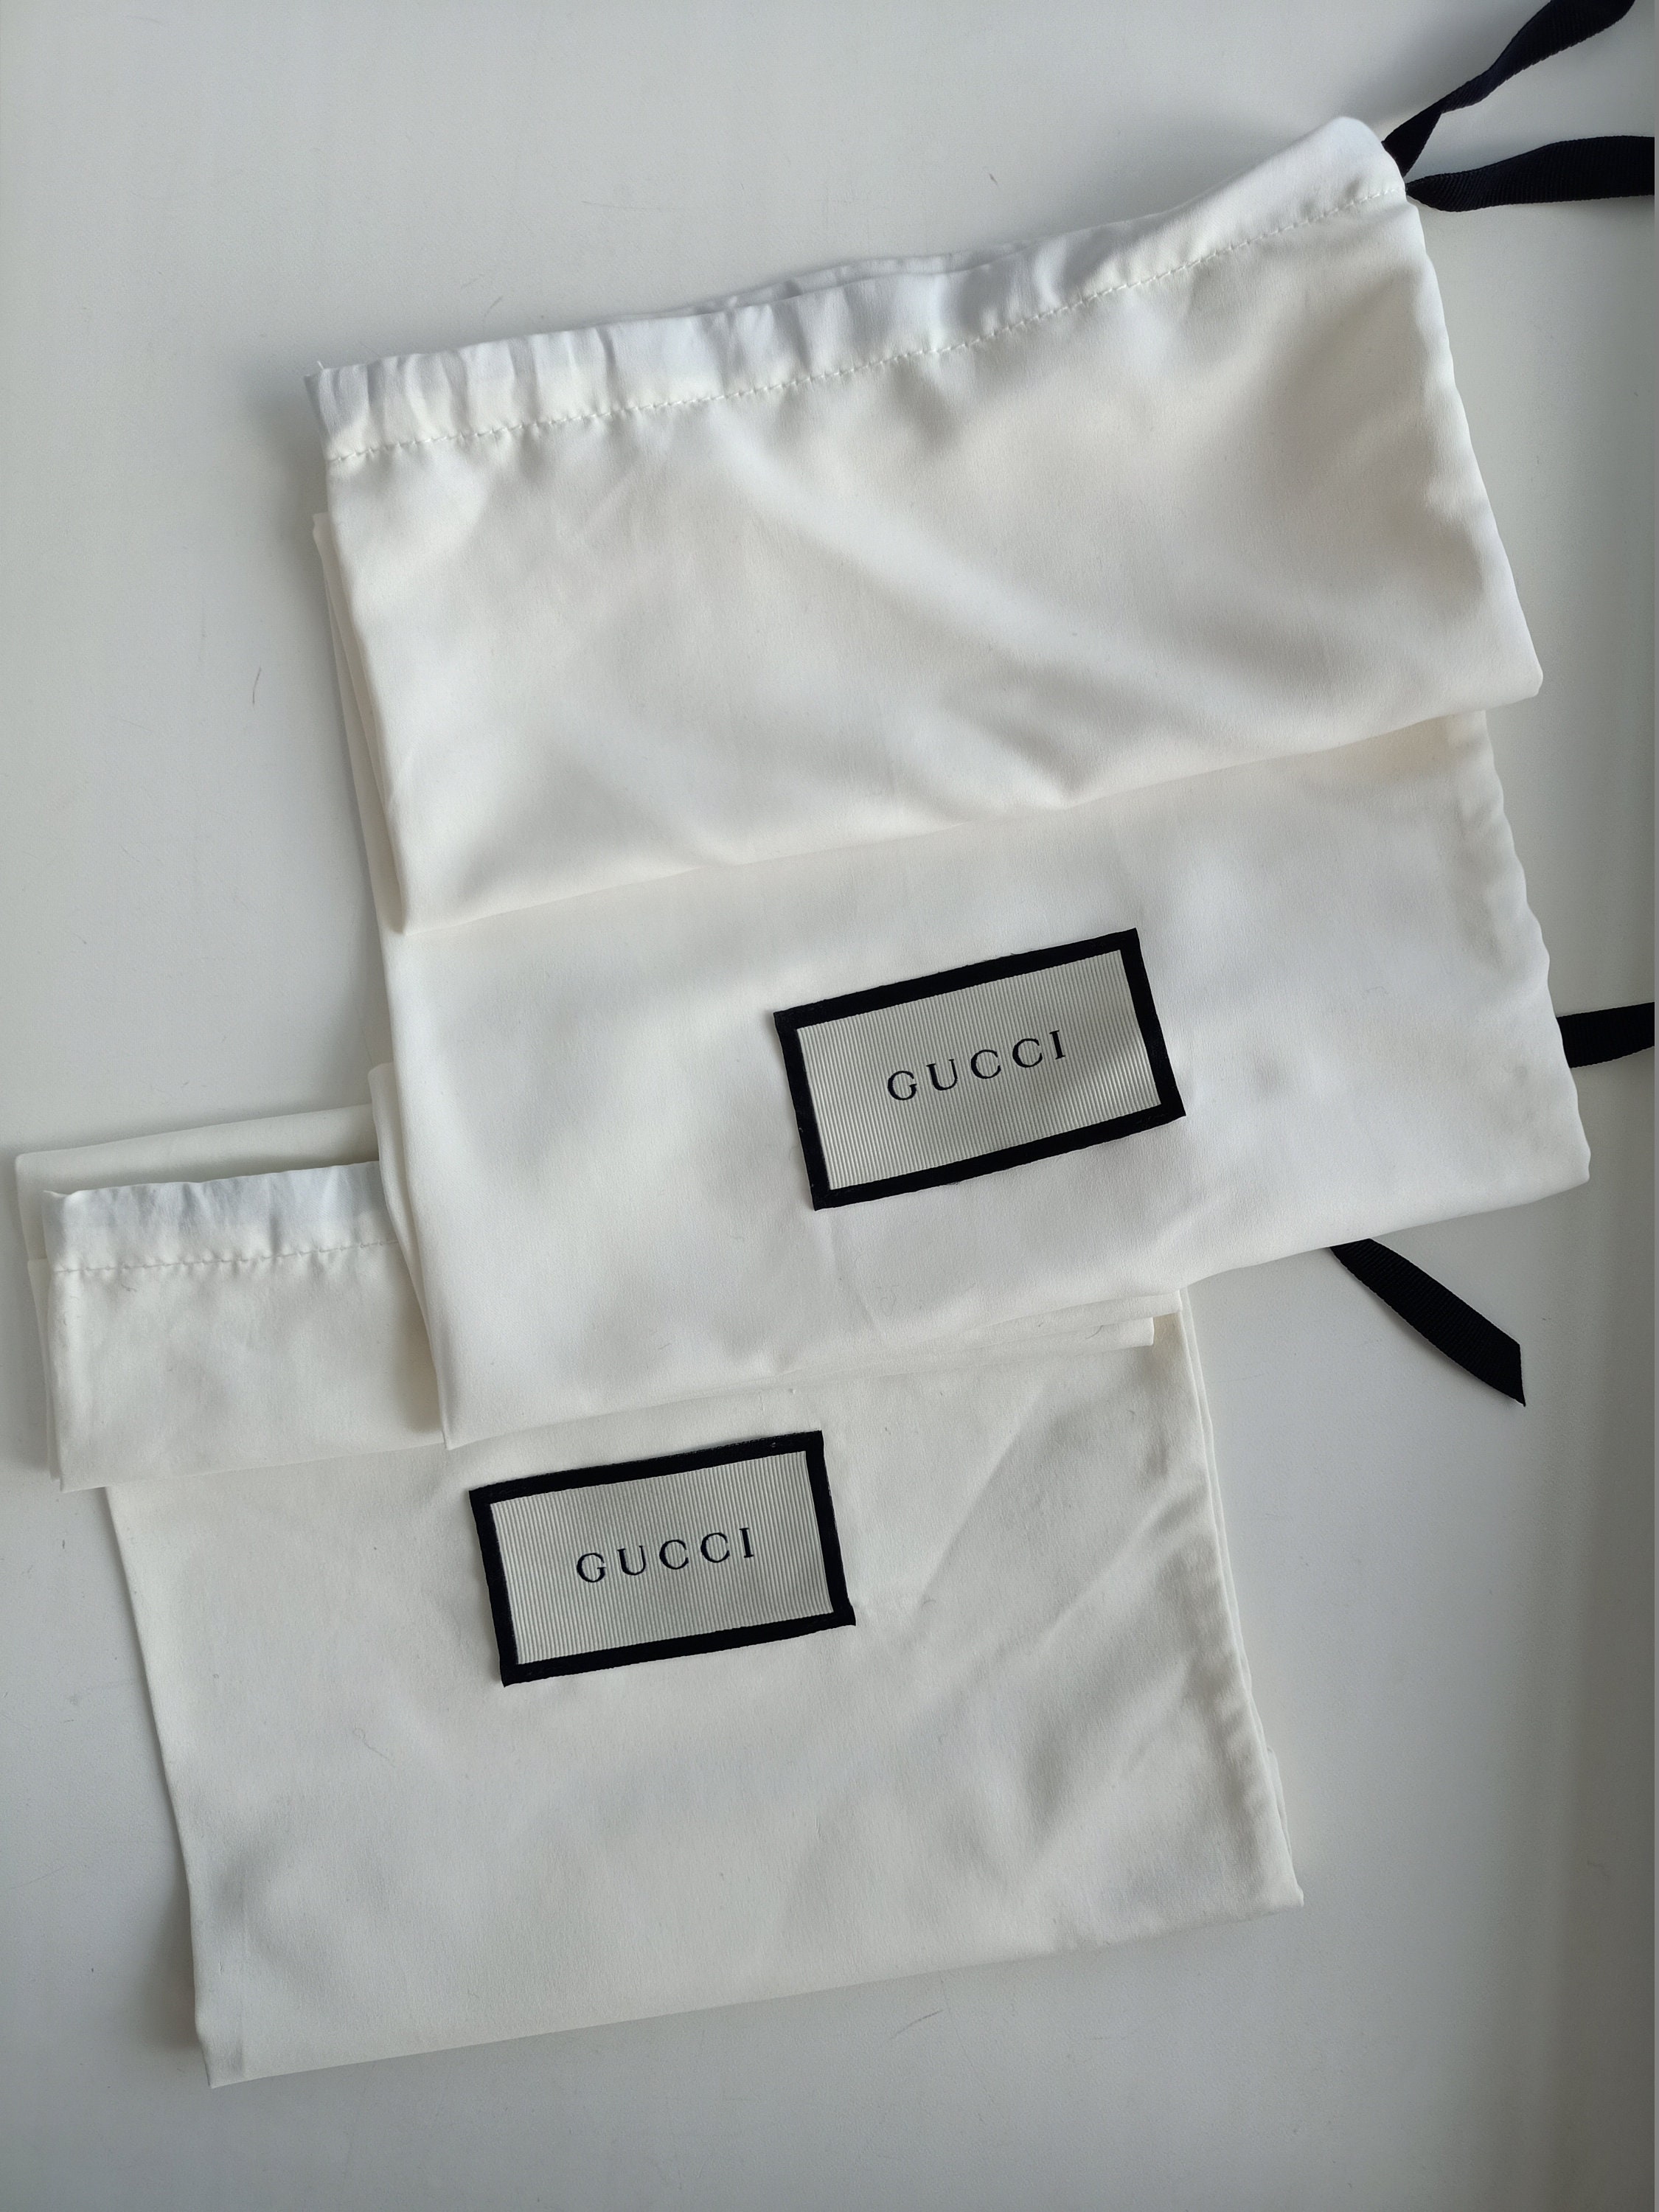 Gucci Dust Bag Cover Drawstring Shoe Storage Travel Bags Set Of 2